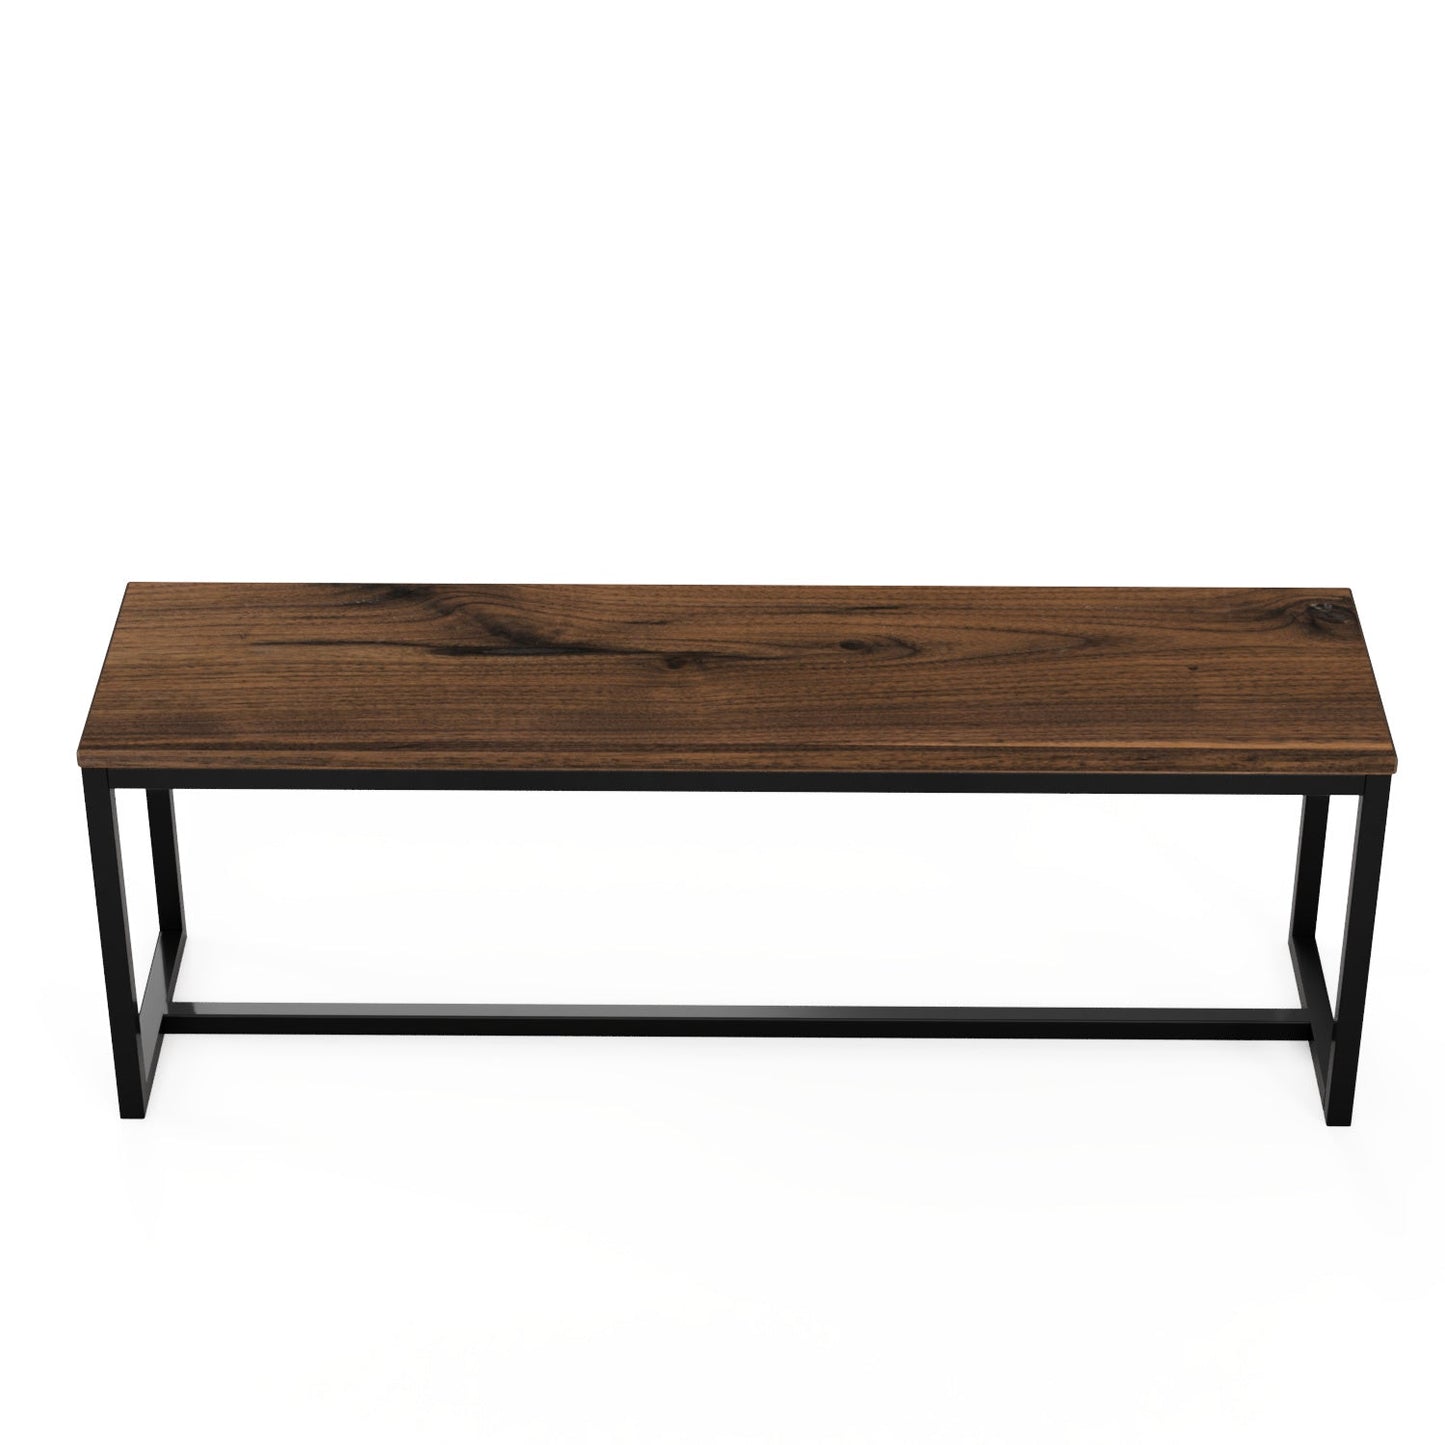 The Sedona Bench - FargoWoodworks